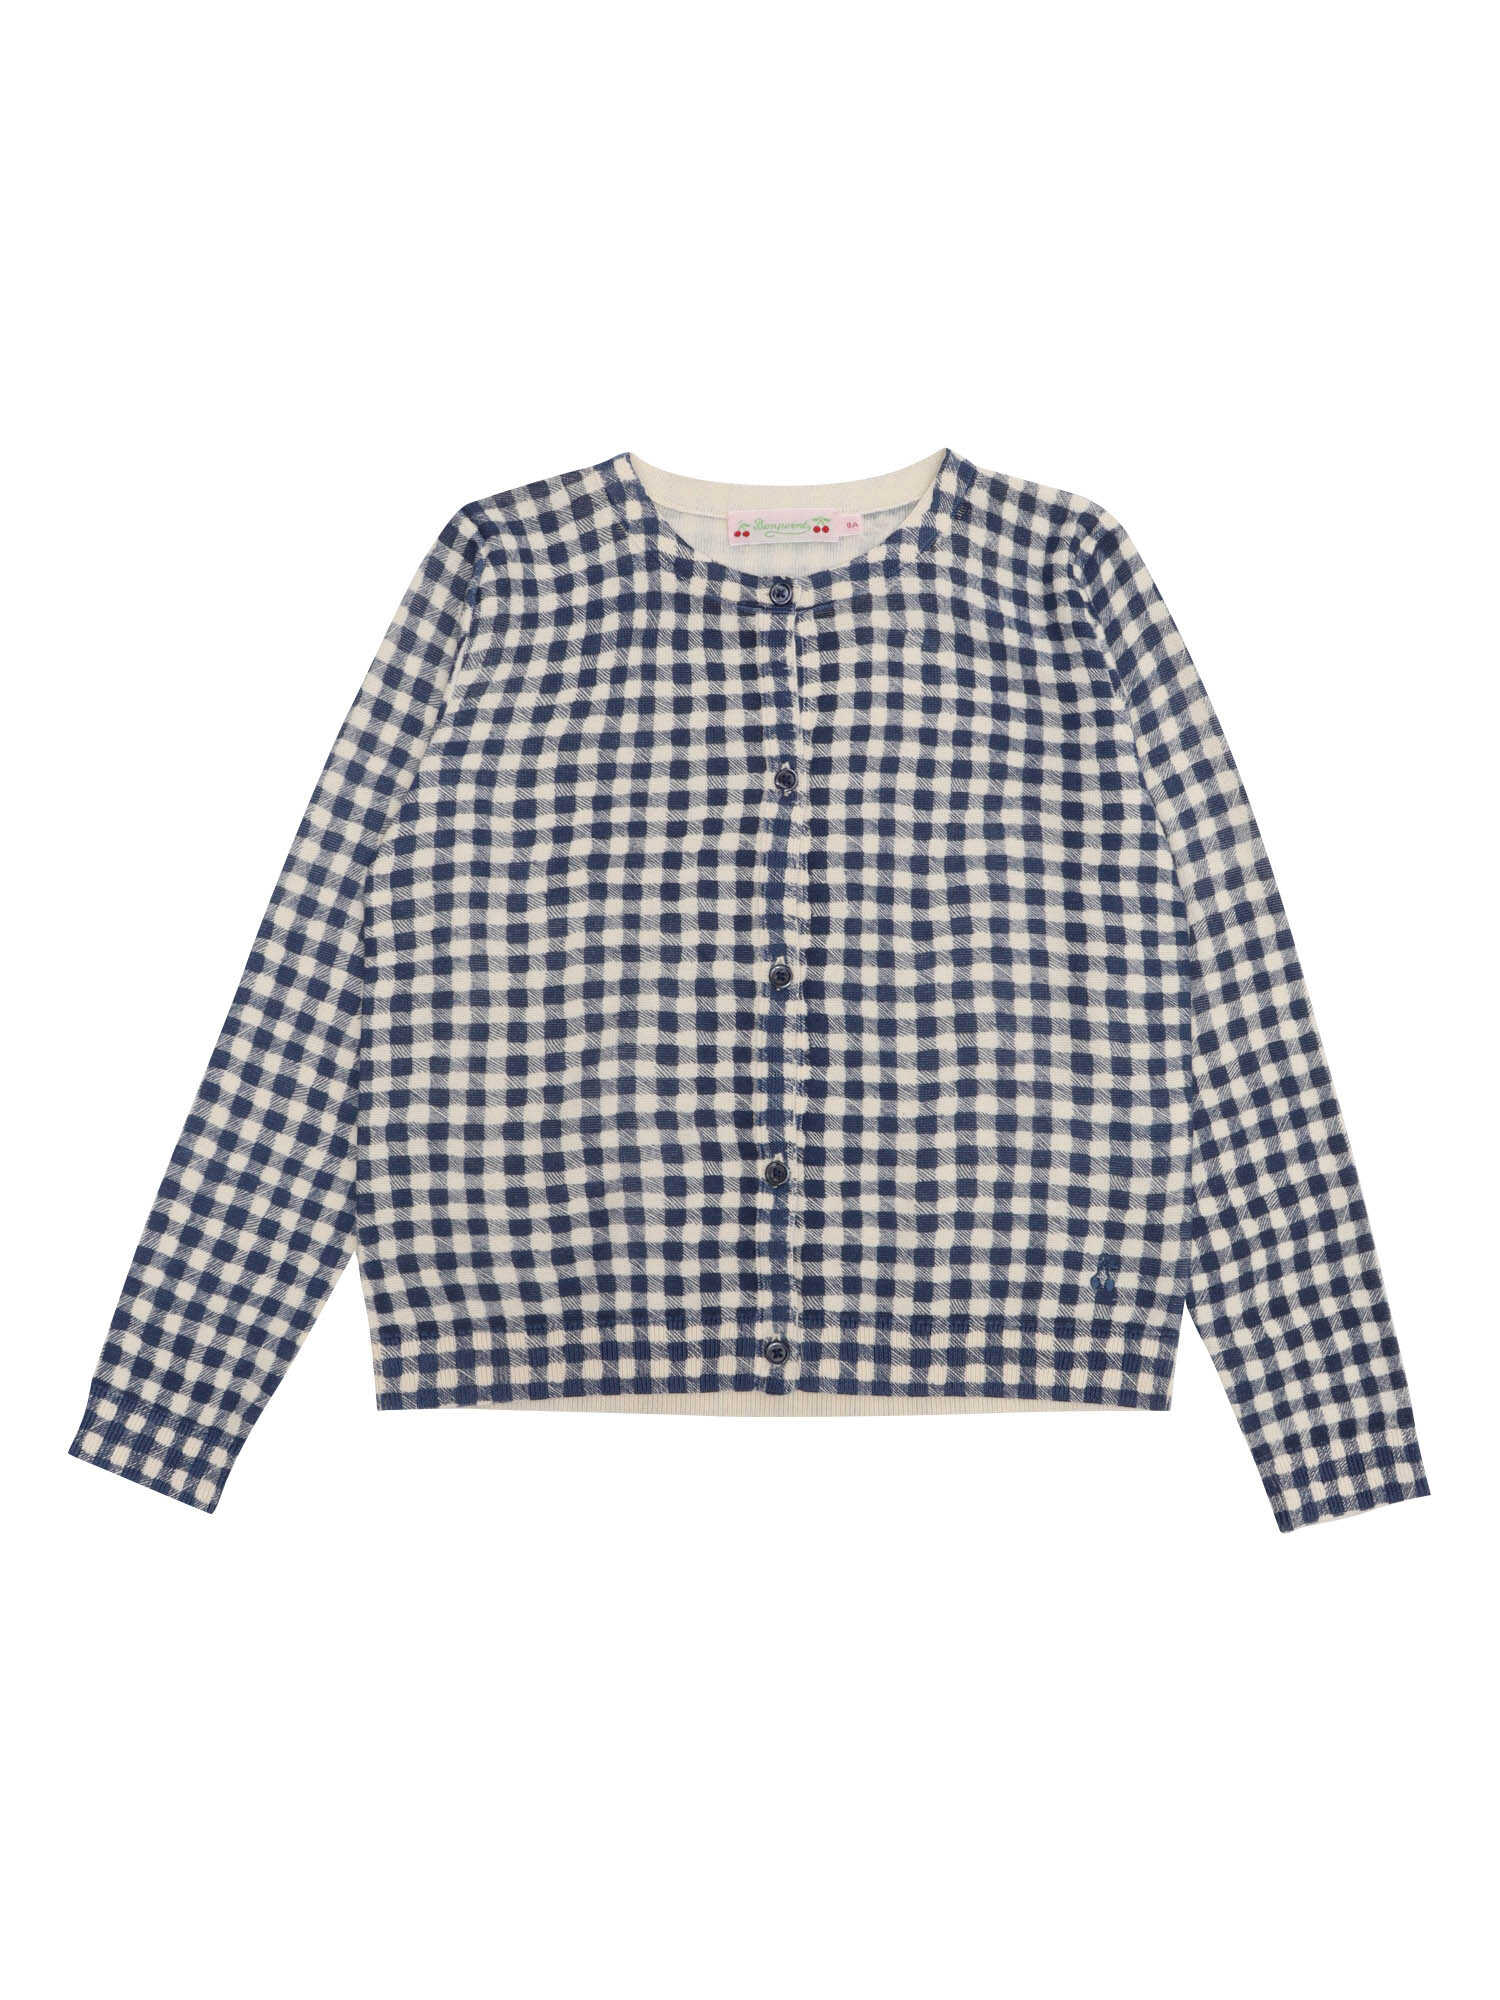 Bonpoint Checked patterned cardigan for girls Blue